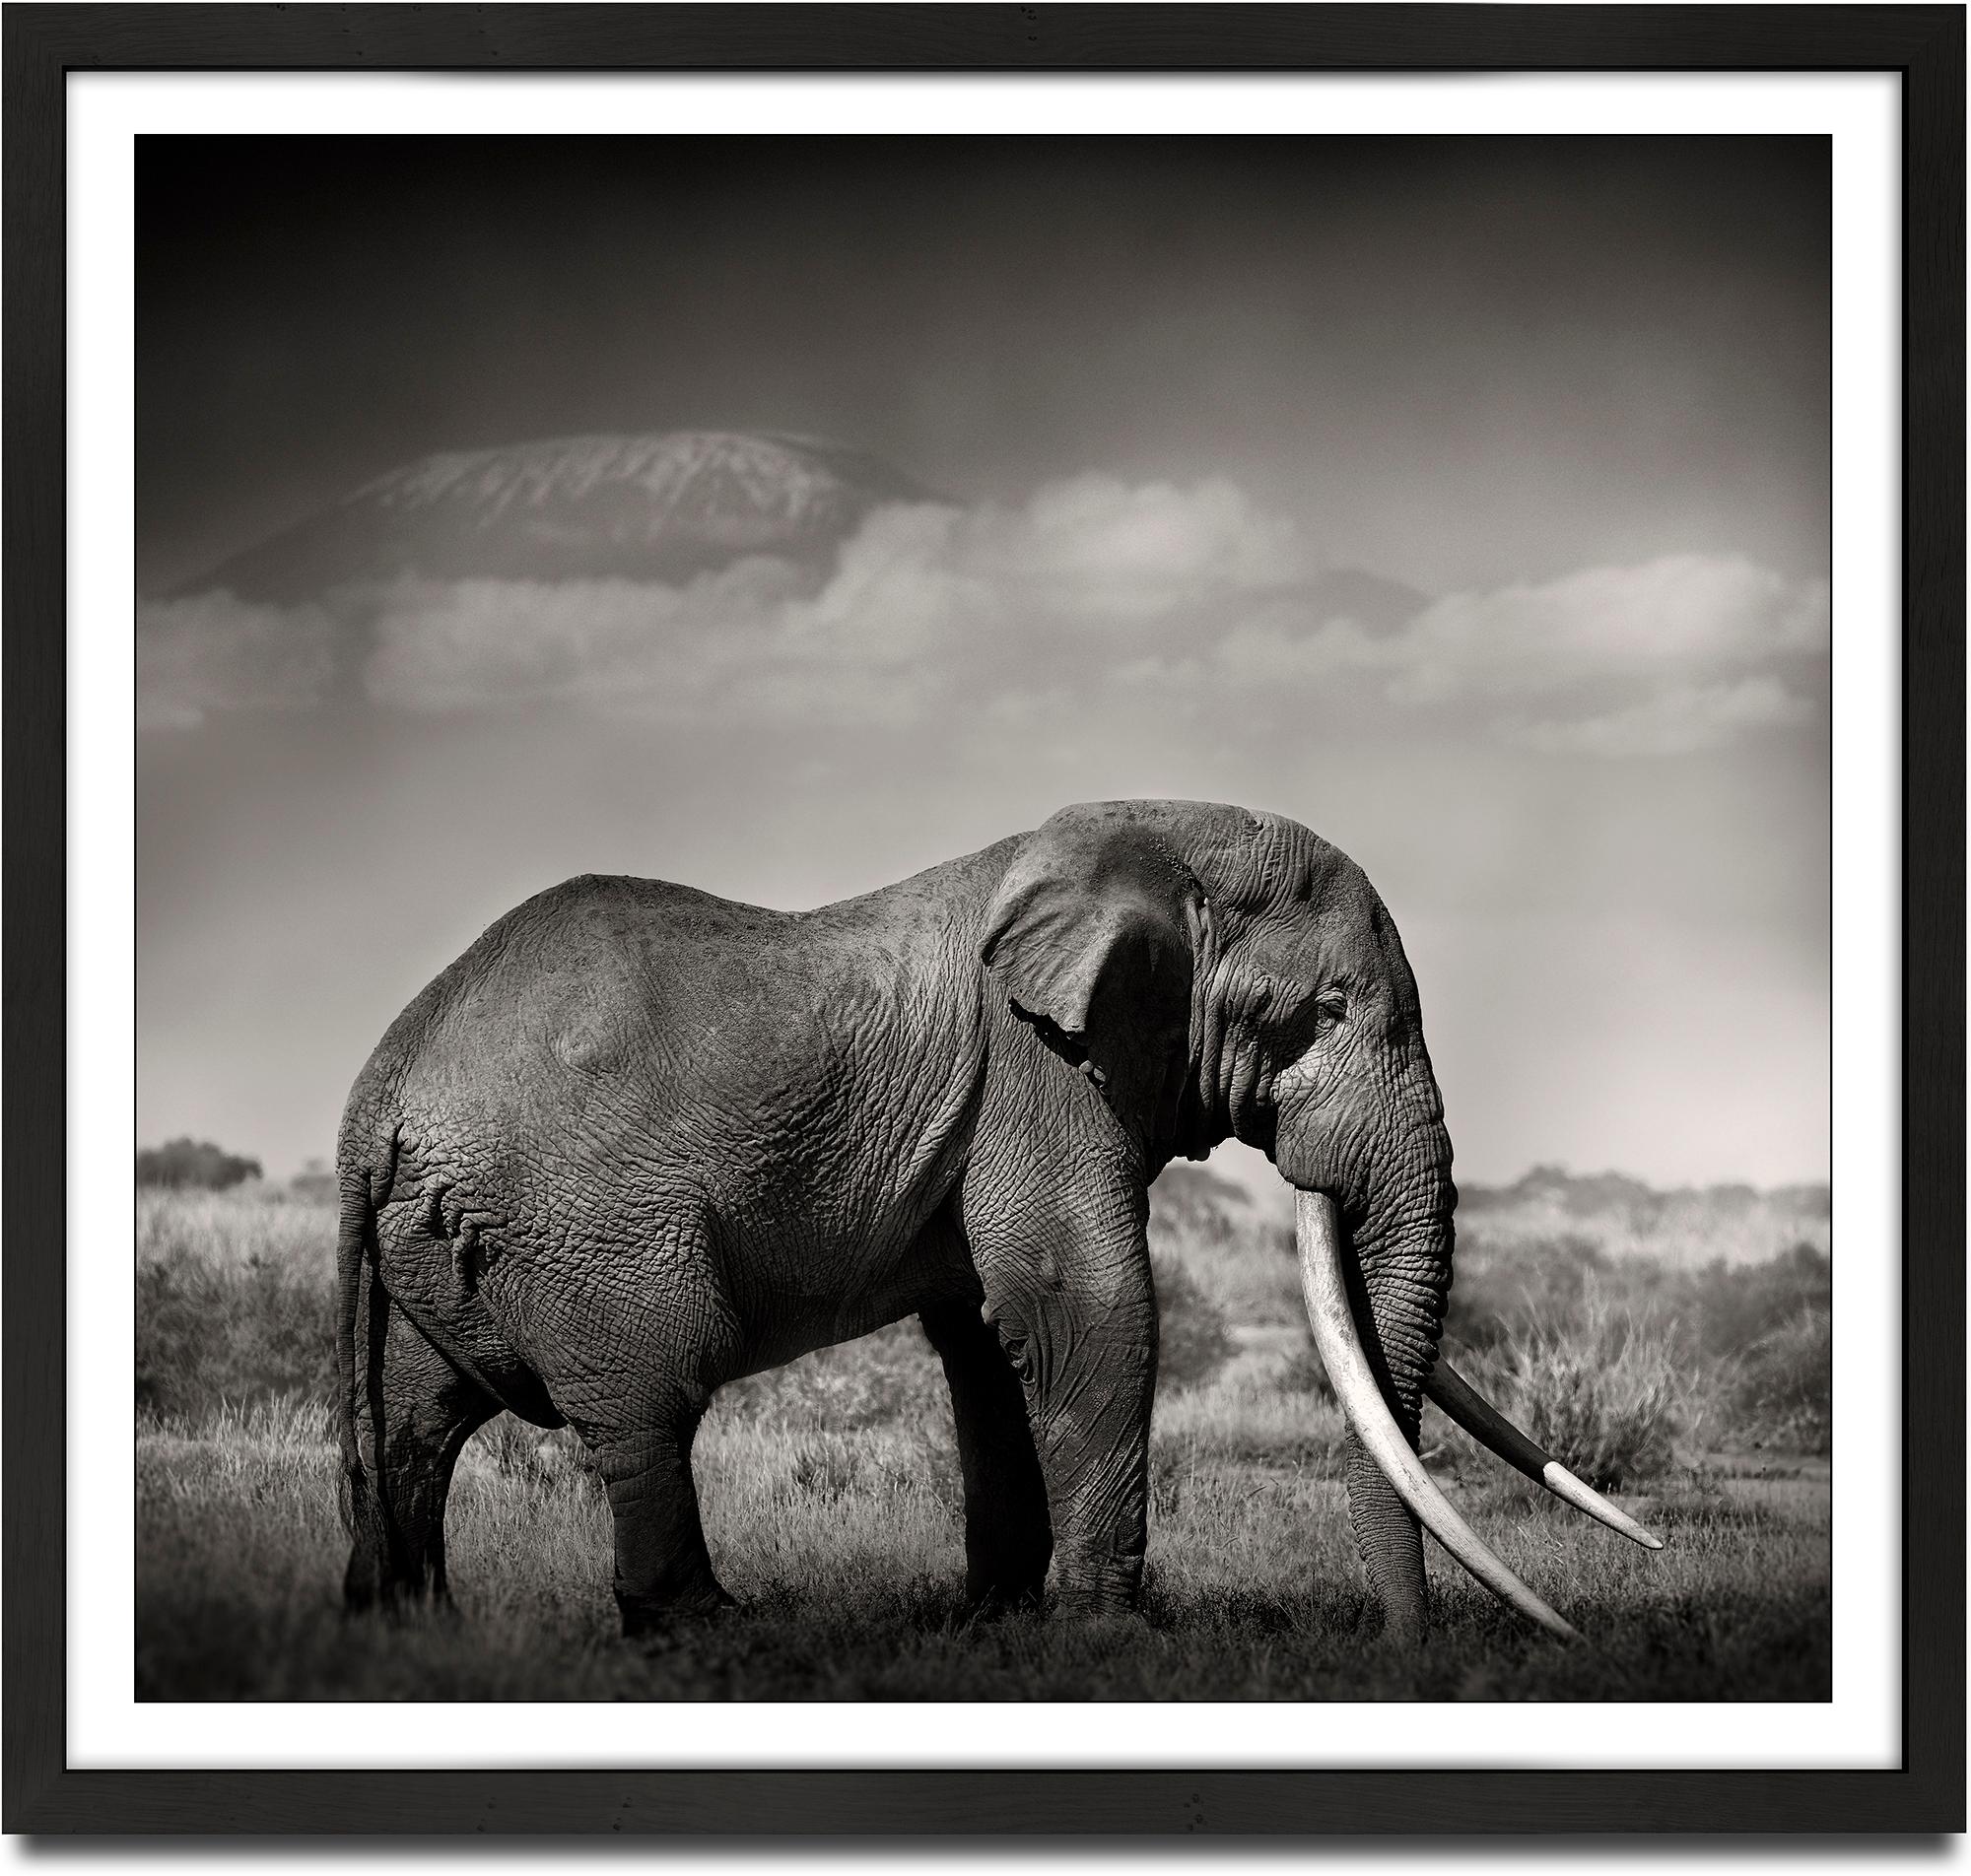 Joachim Schmeisser Landscape Photograph - Tim's Land, a Tribute to the icons of Africa, Elephant, wildlife, blackandwhite